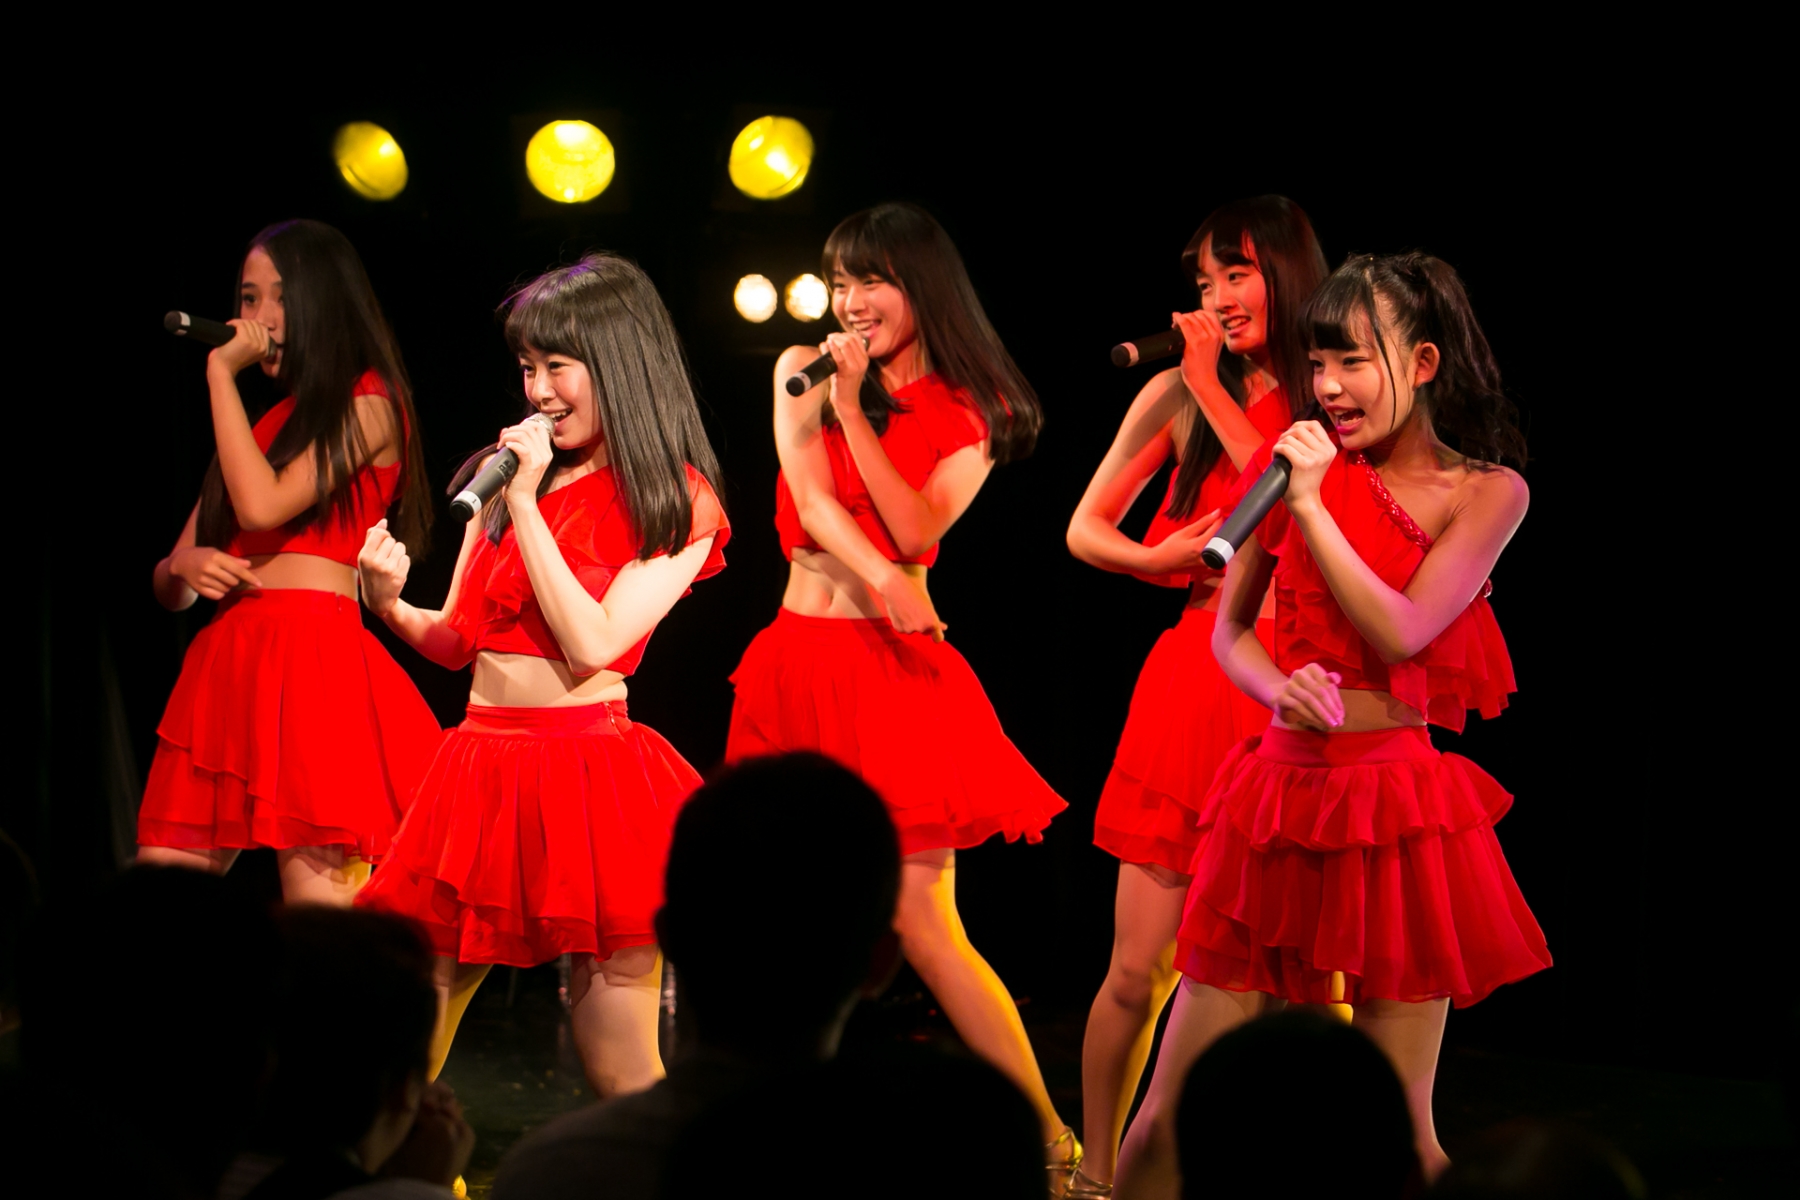 DIANNA☆SWEET Promises Fans “We’re Aiming for Budokan!” During Their 3rd Solo Concert!